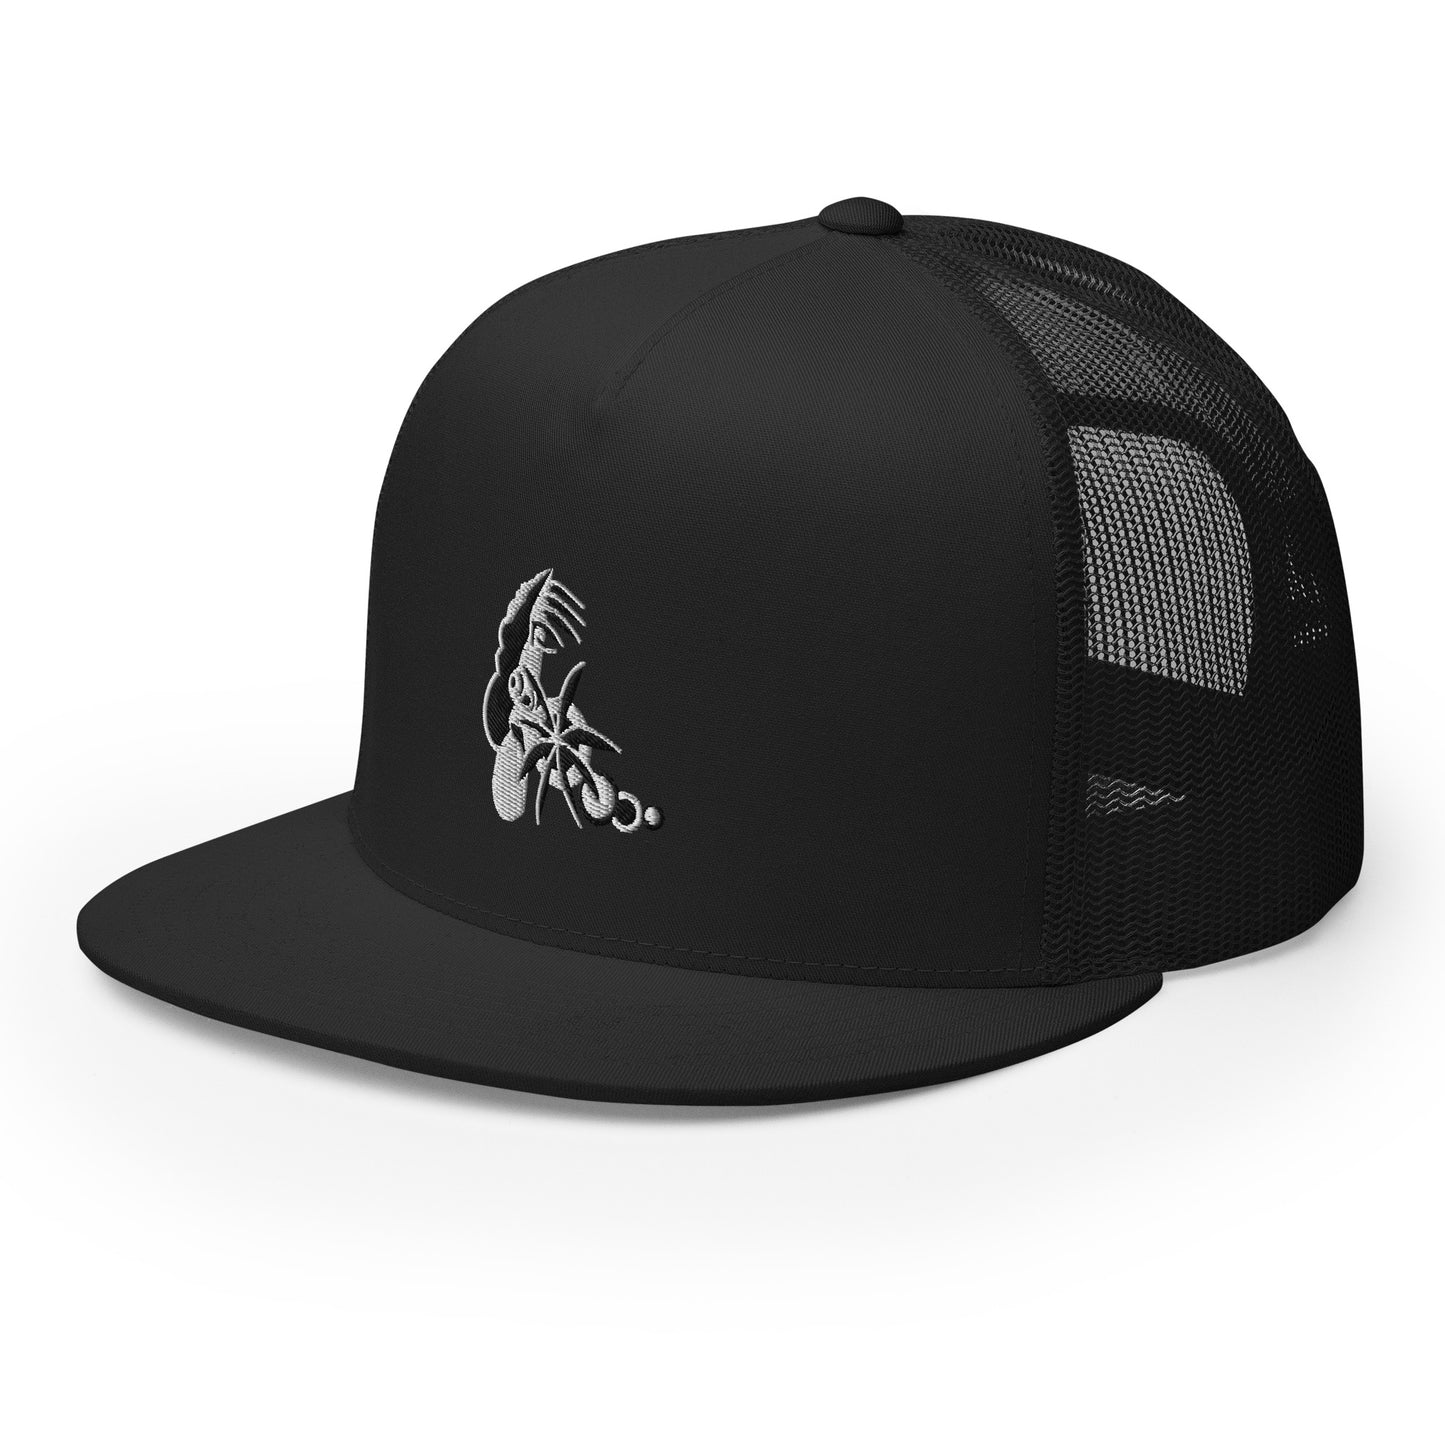 "The After Life" Trucker Cap